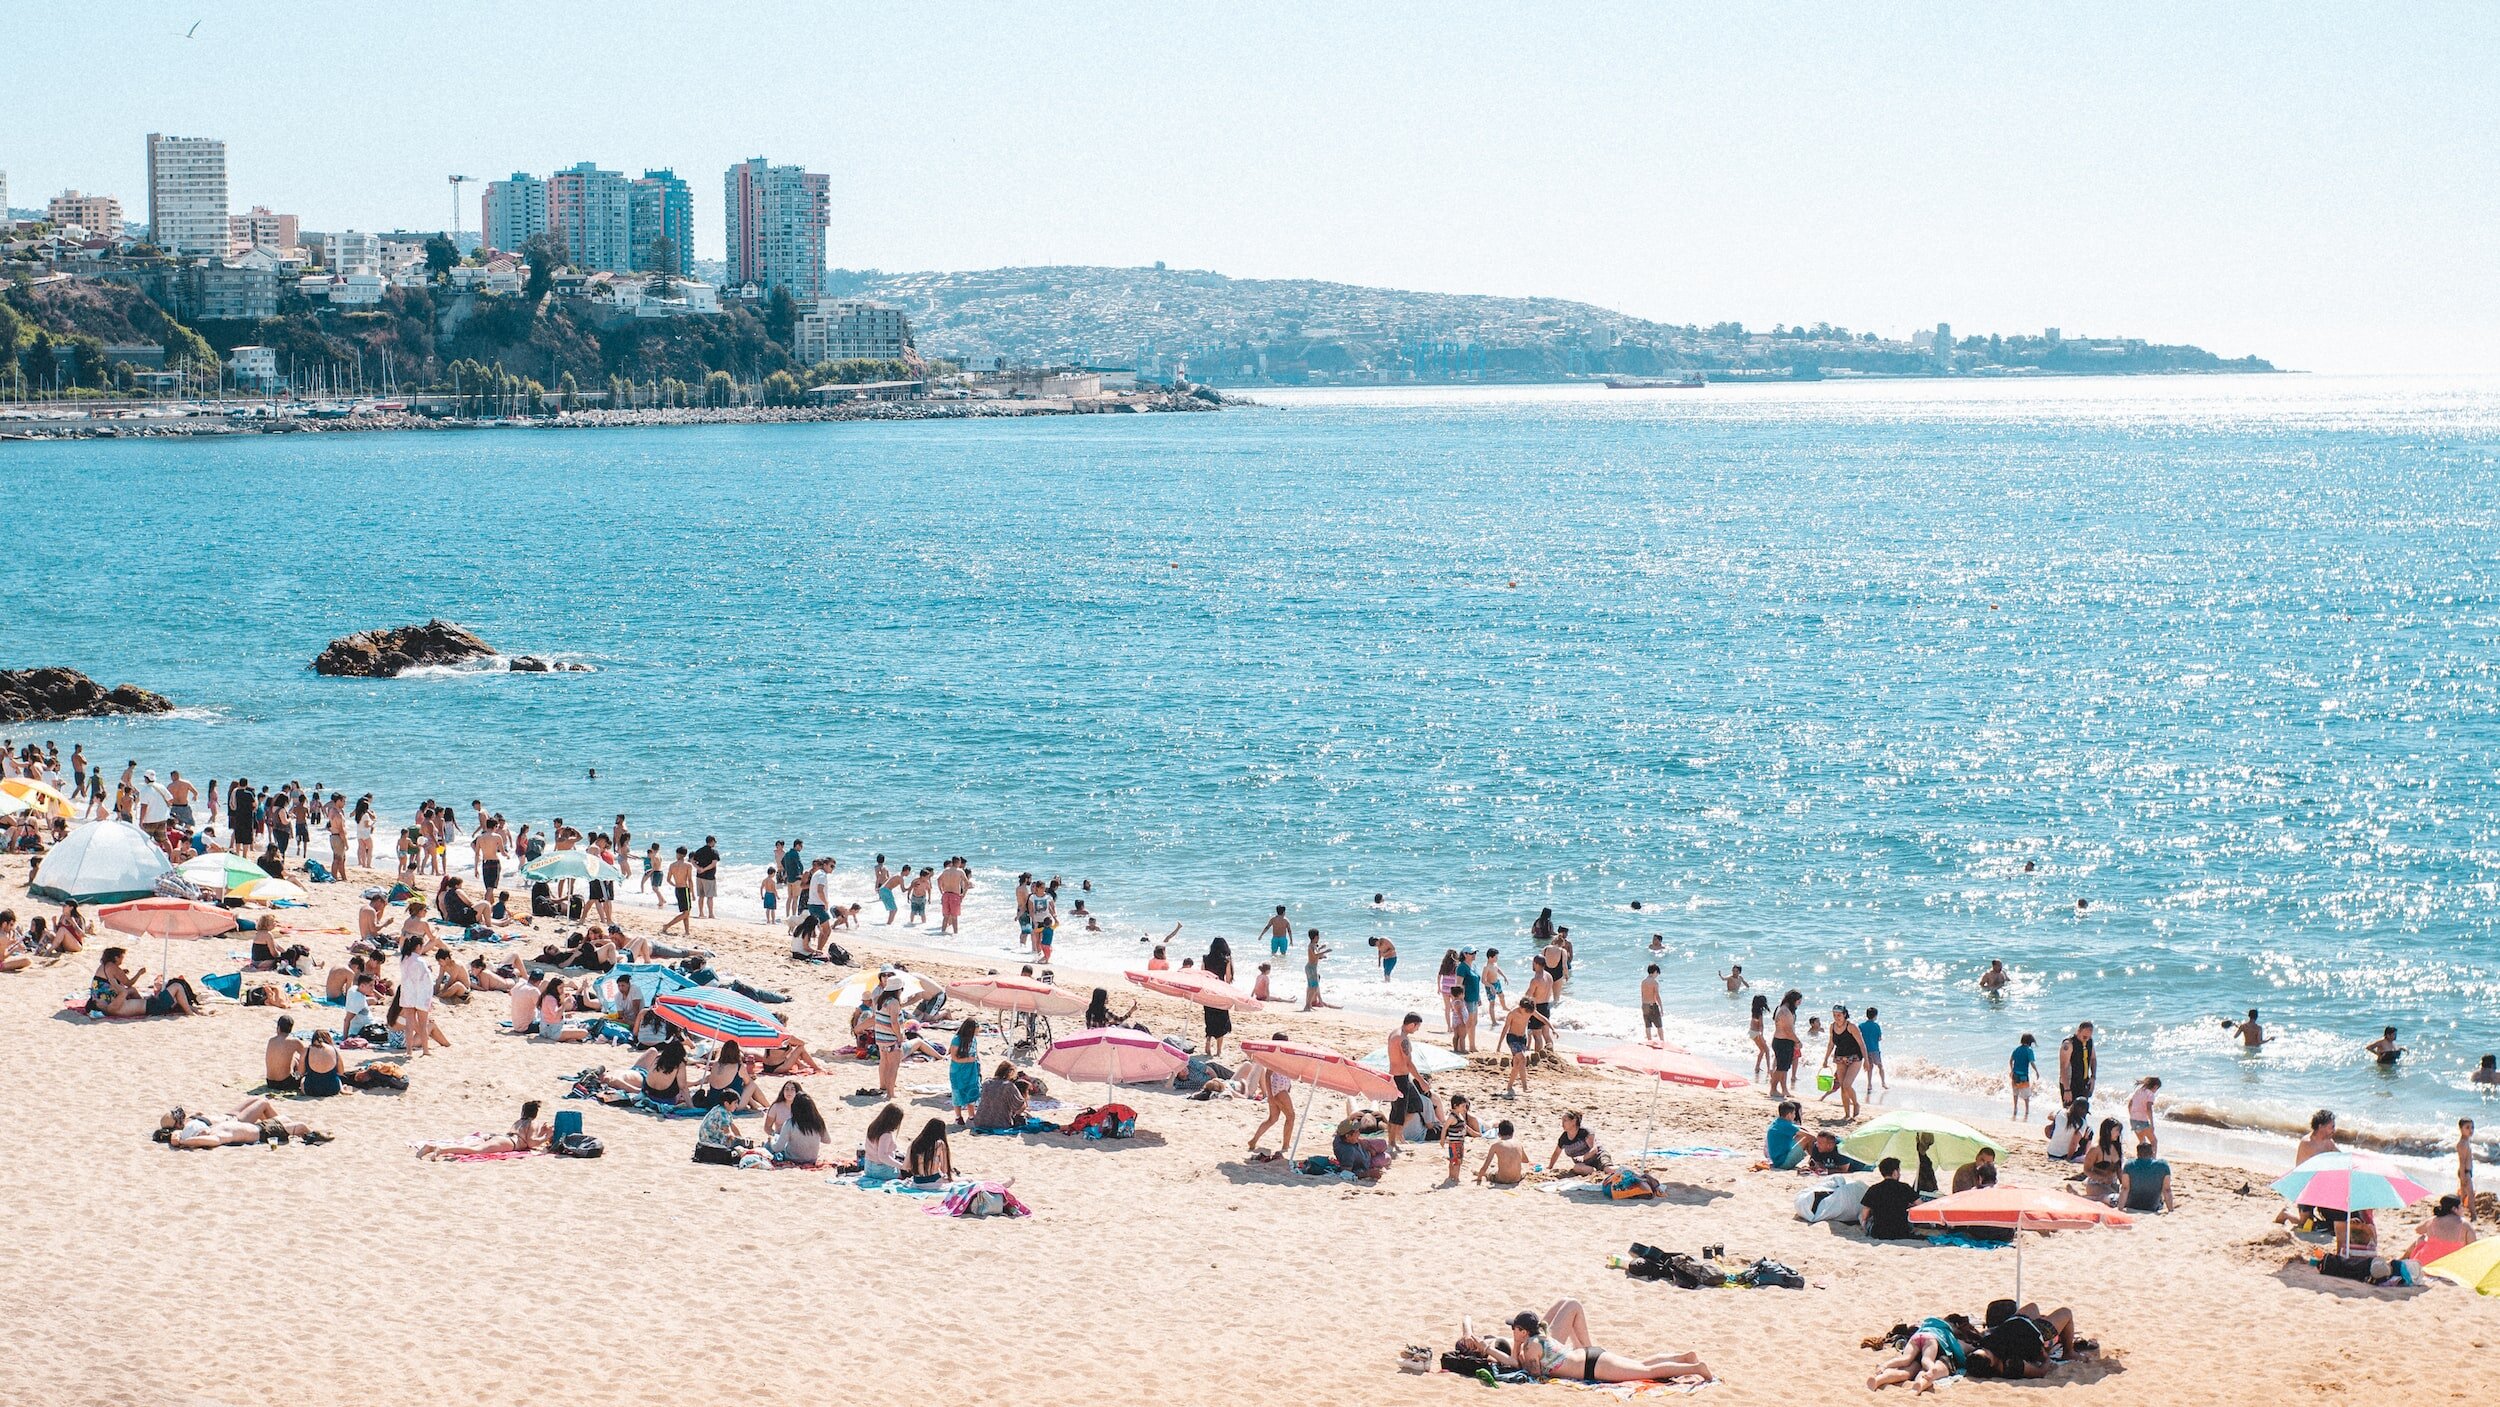 Swimmers and sun bathers enjoying a crowded beach, with high rise apartments off to the left, in Viña del Mar